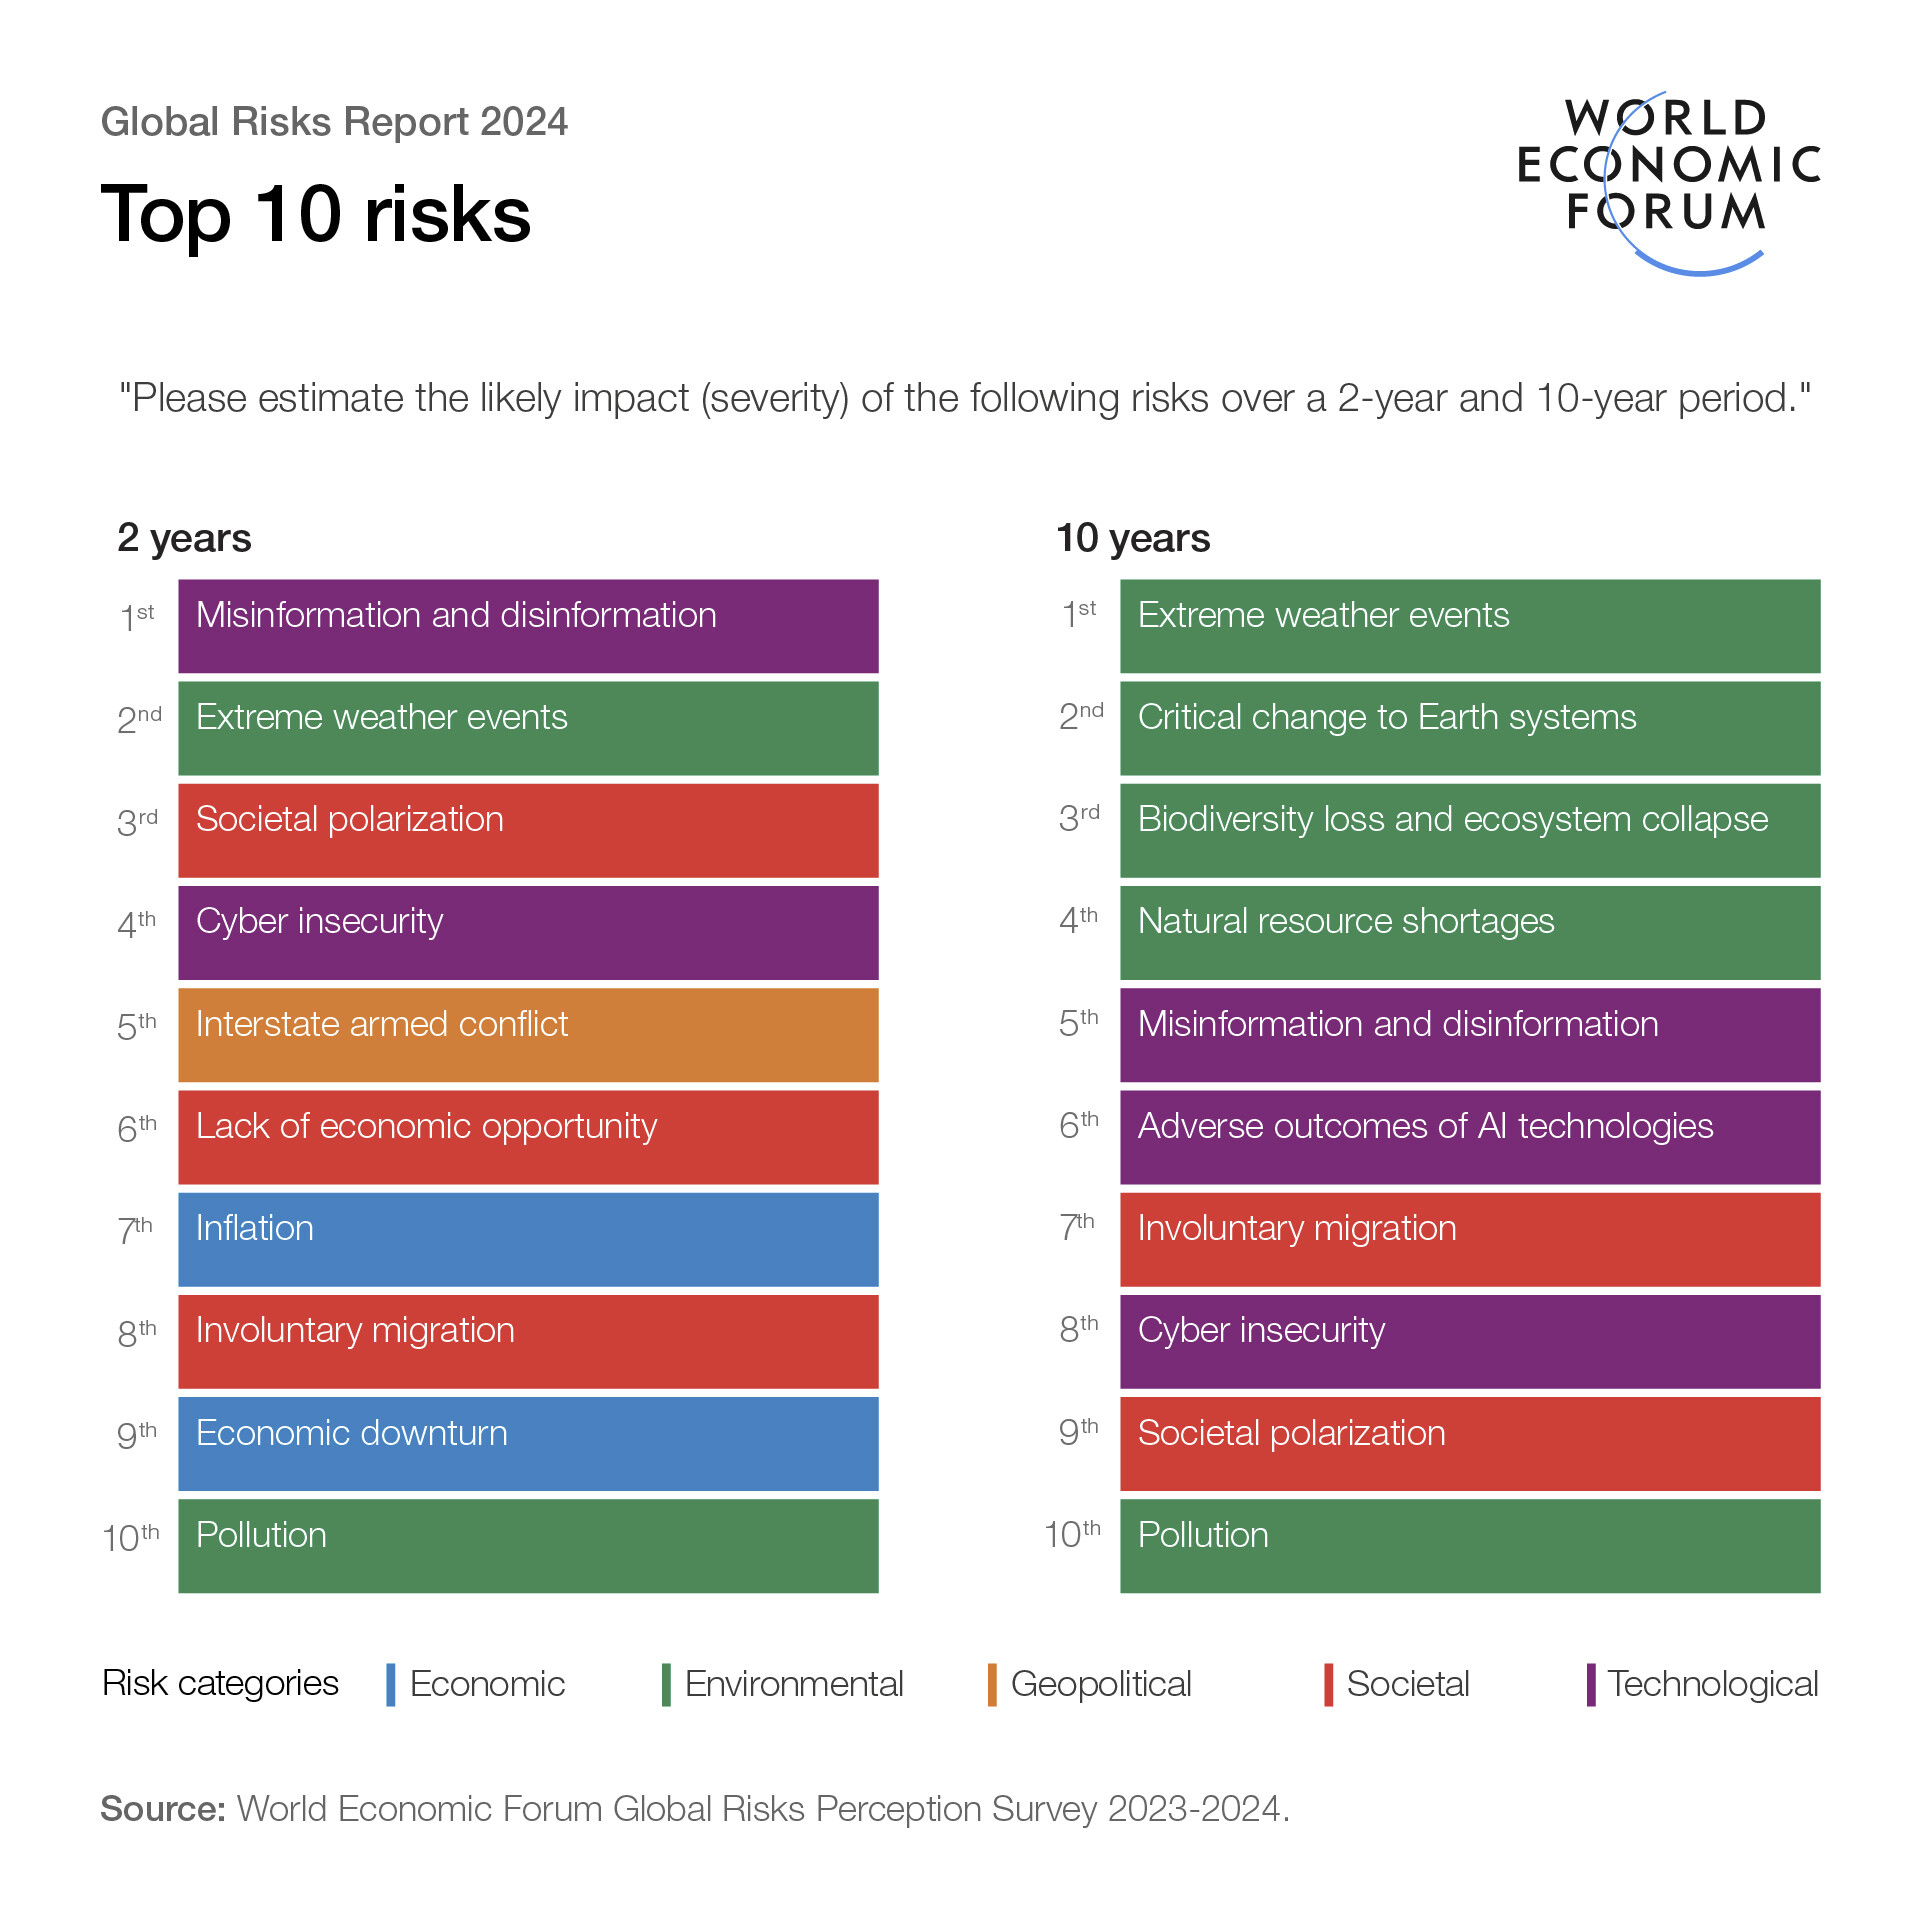 A graphic showing the global outlook of risks for the next 2 and 10 years.